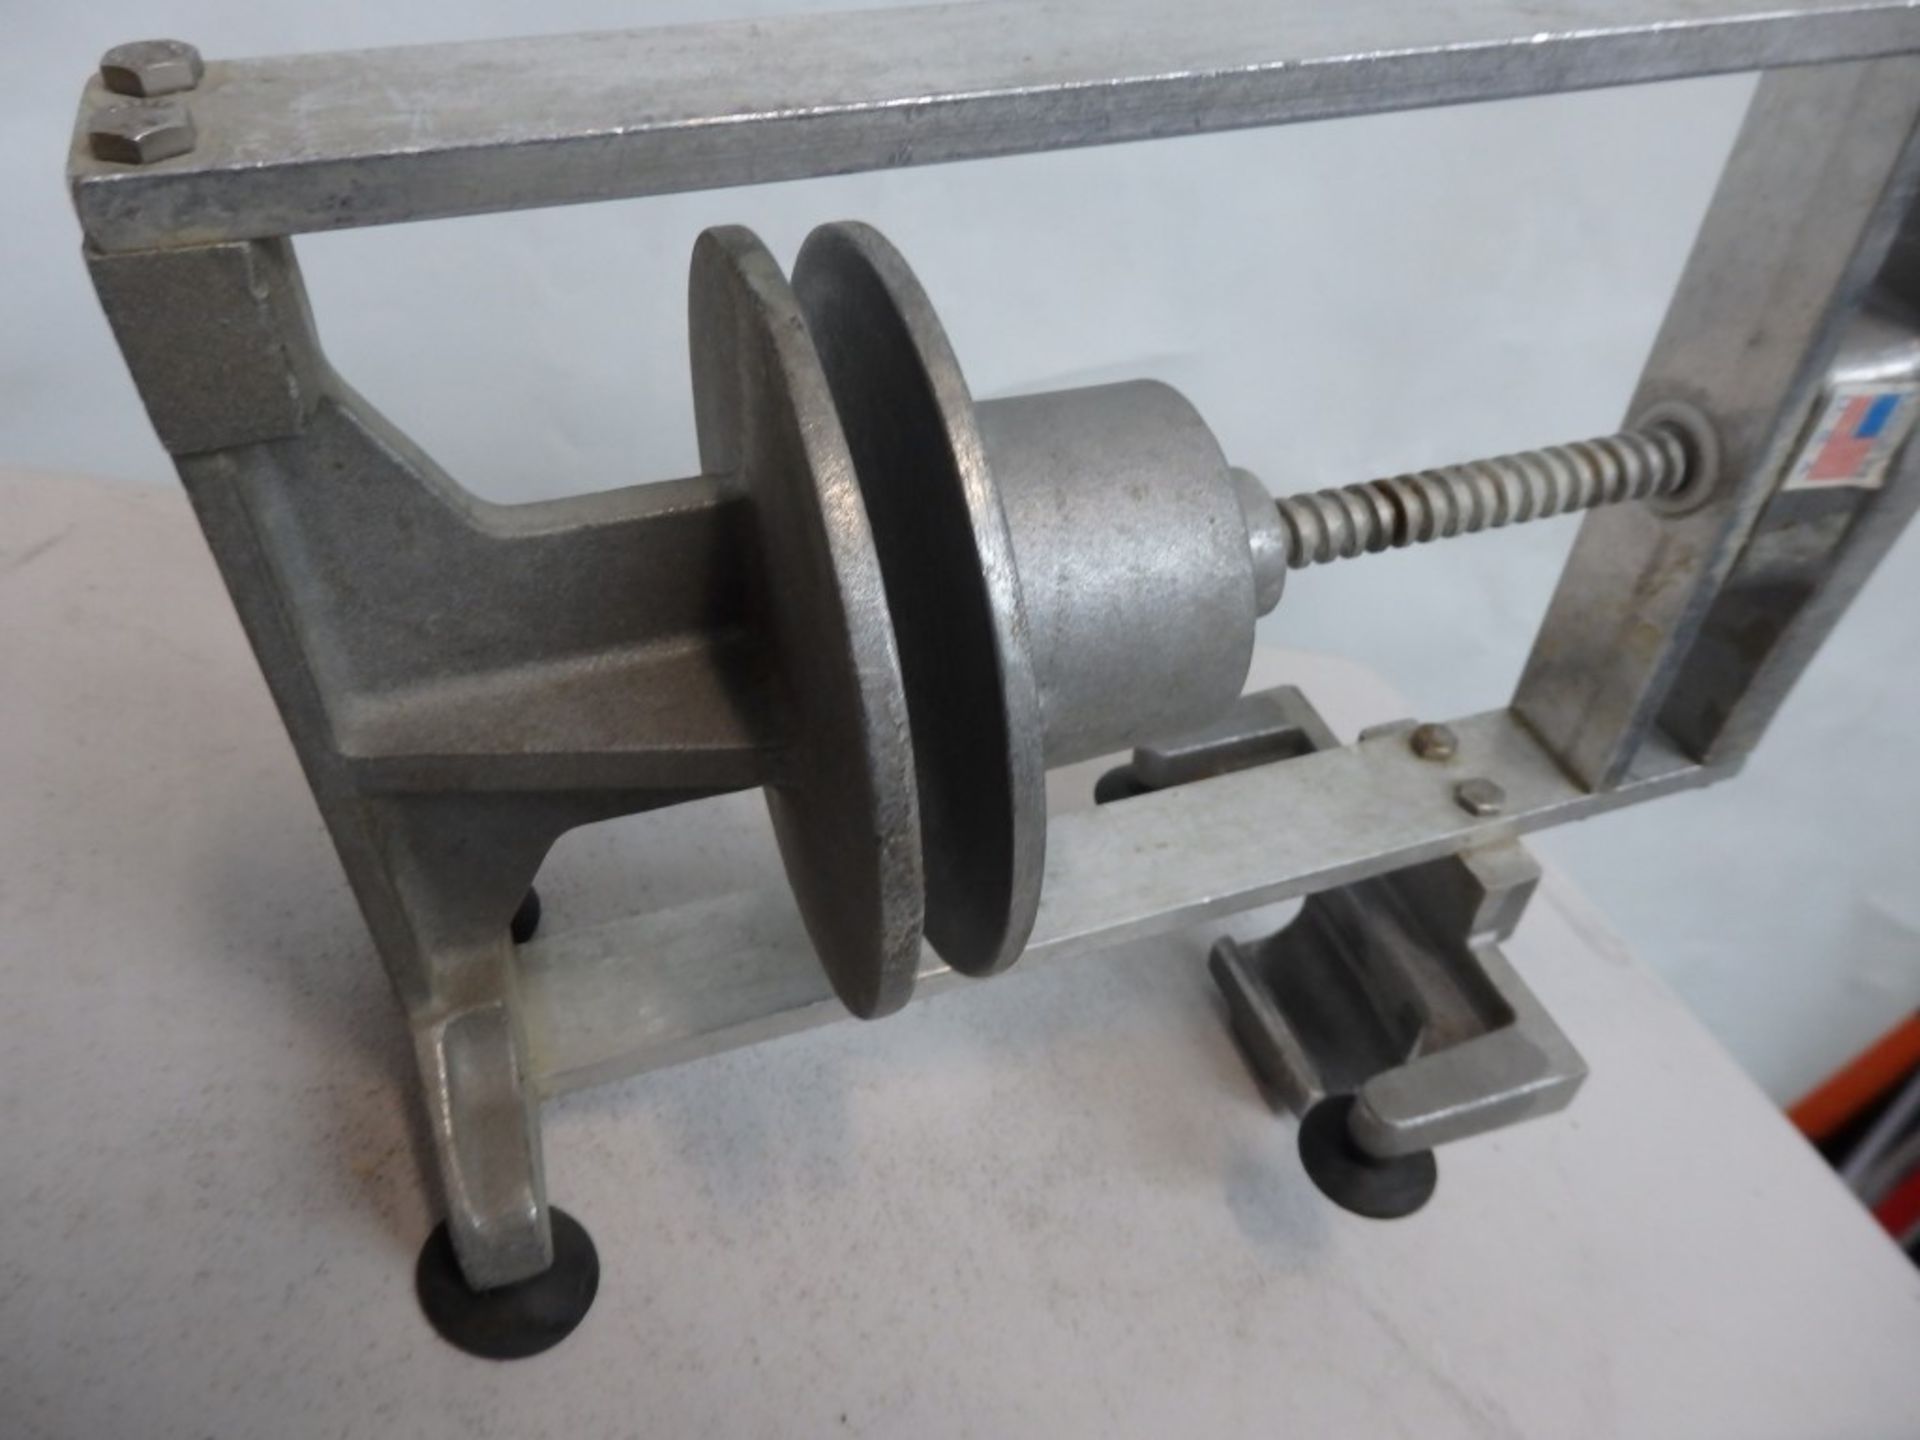 1 x Nemco N55800 Easy Tuna Press for Food Preparation - Recently Removed from a Professional - Image 2 of 3